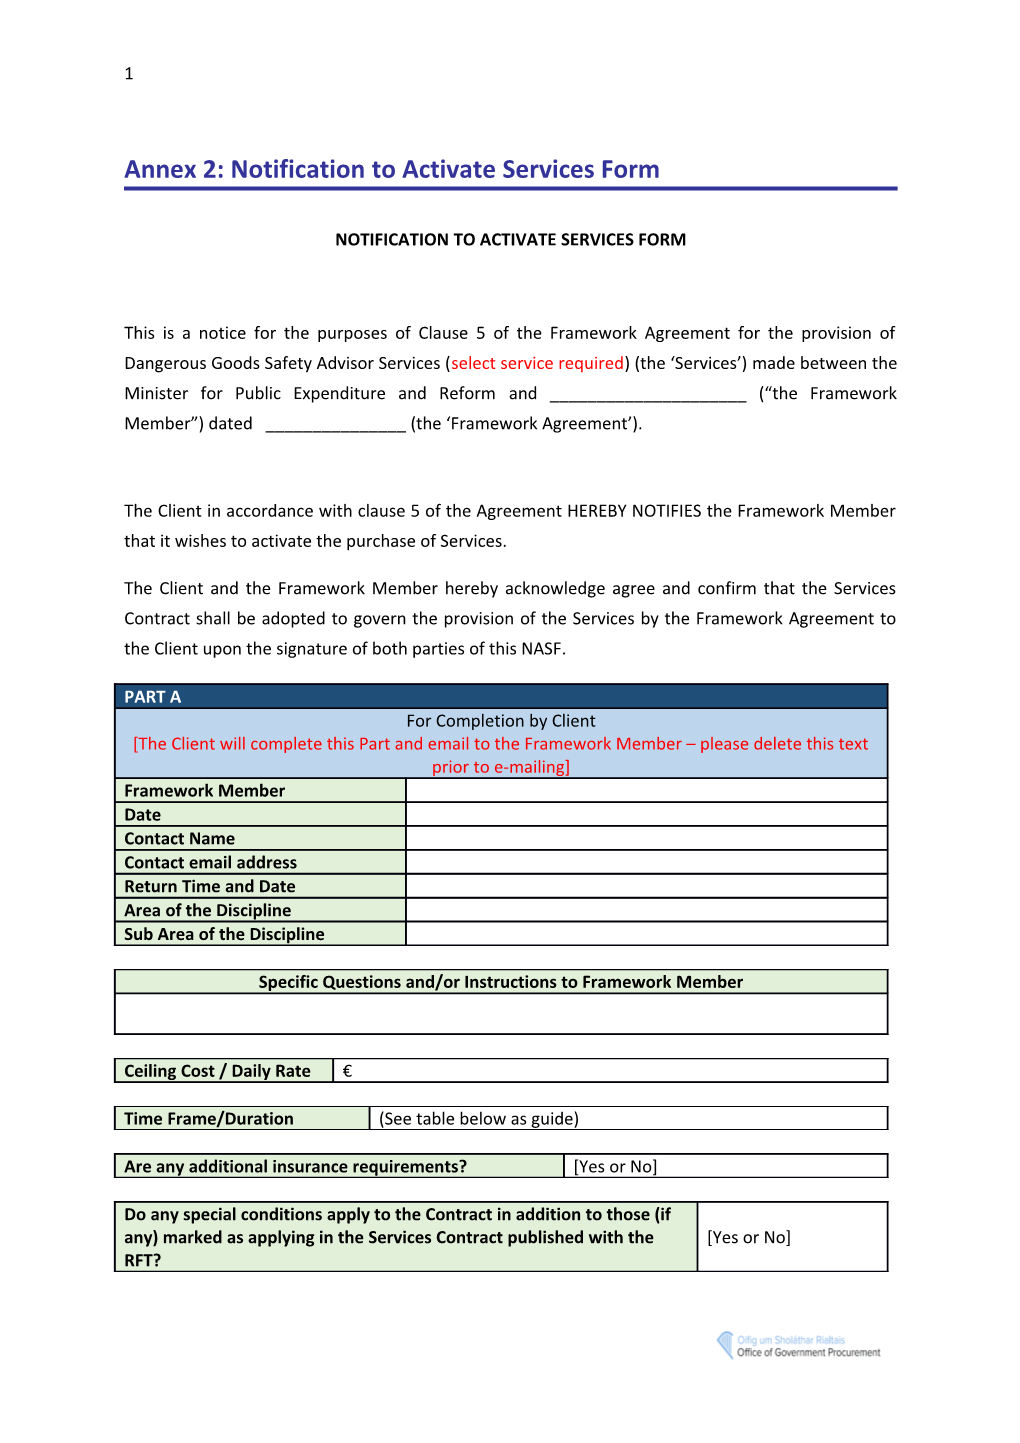 Annex 2: Notification to Activate Services Form